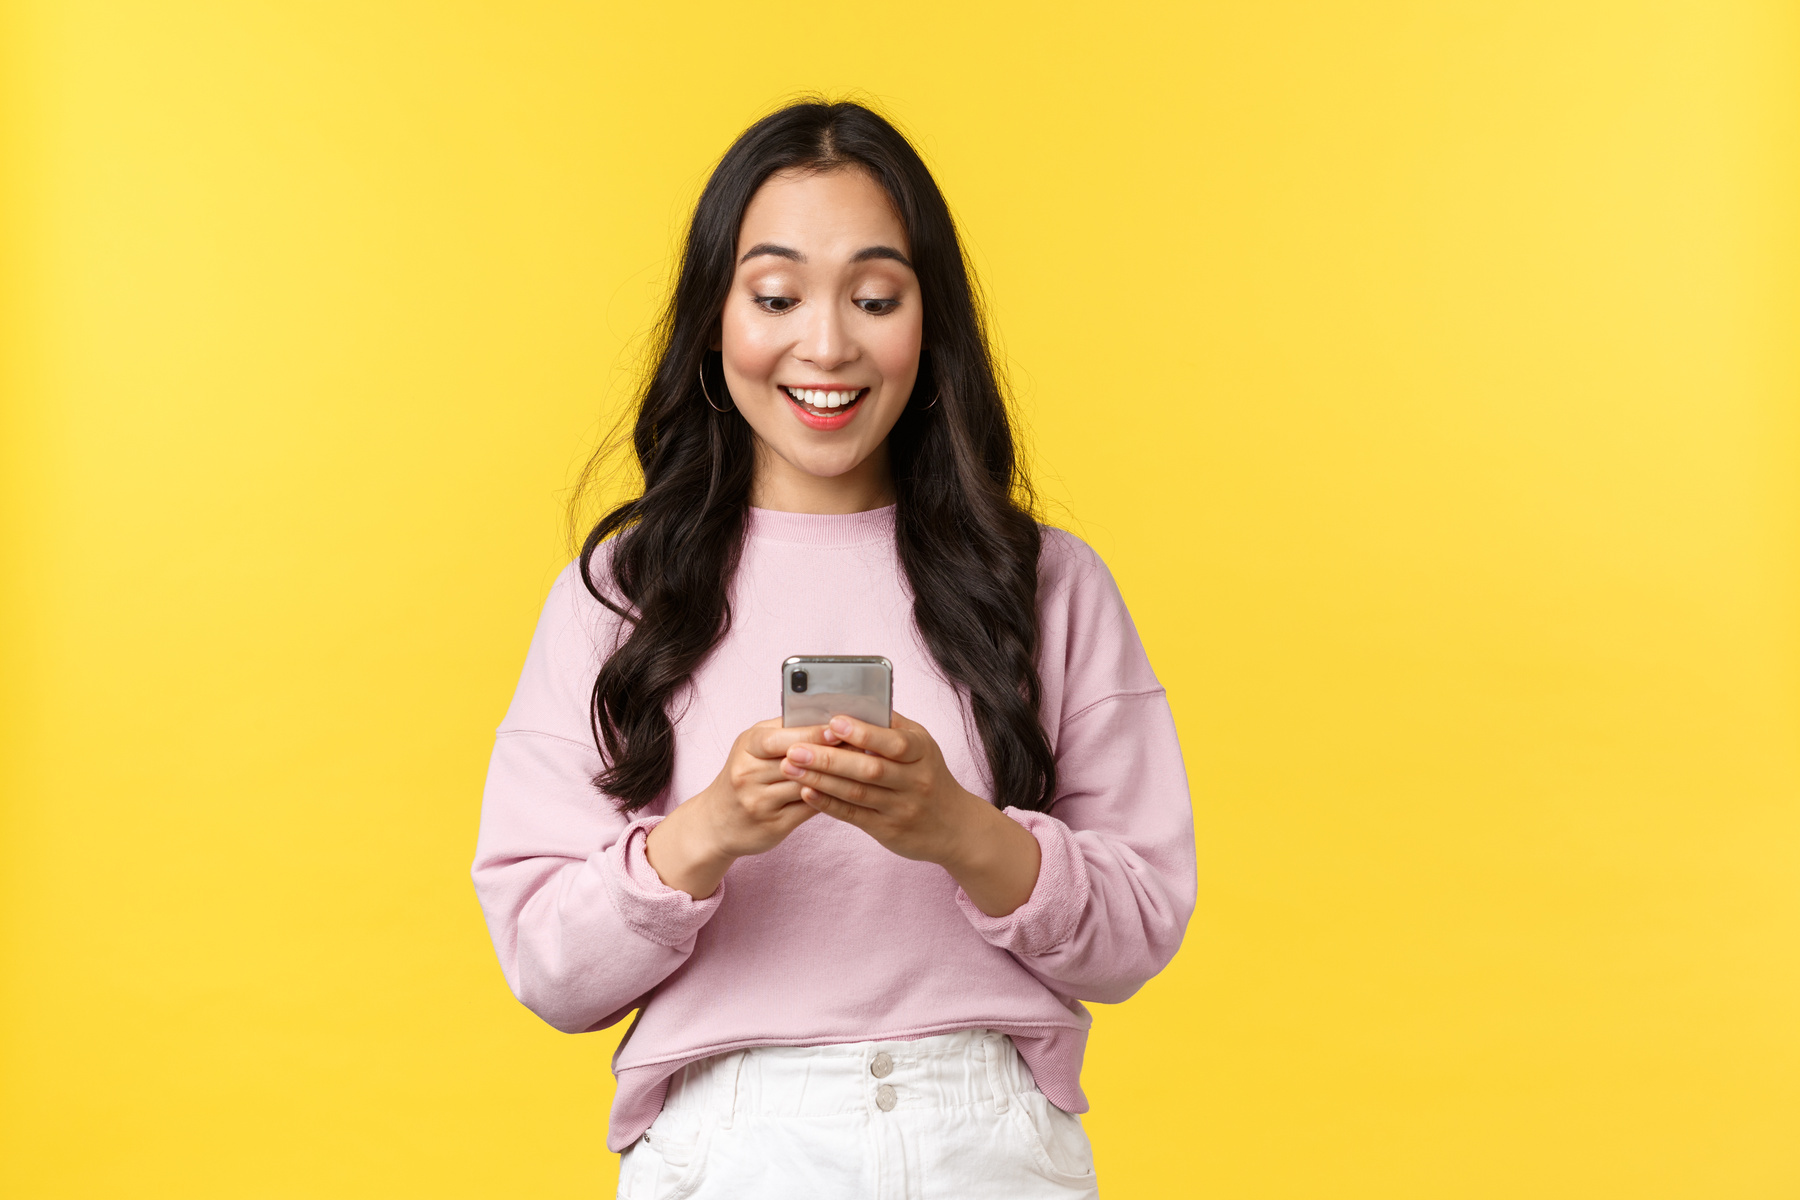 People Emotions, Lifestyle Leisure and Beauty Concept. Surprised and Happy Asian Girl Receive Great News over Phone, Looking at Mobile Display with Amazed Smile, Standing Yellow Background Rejoicing